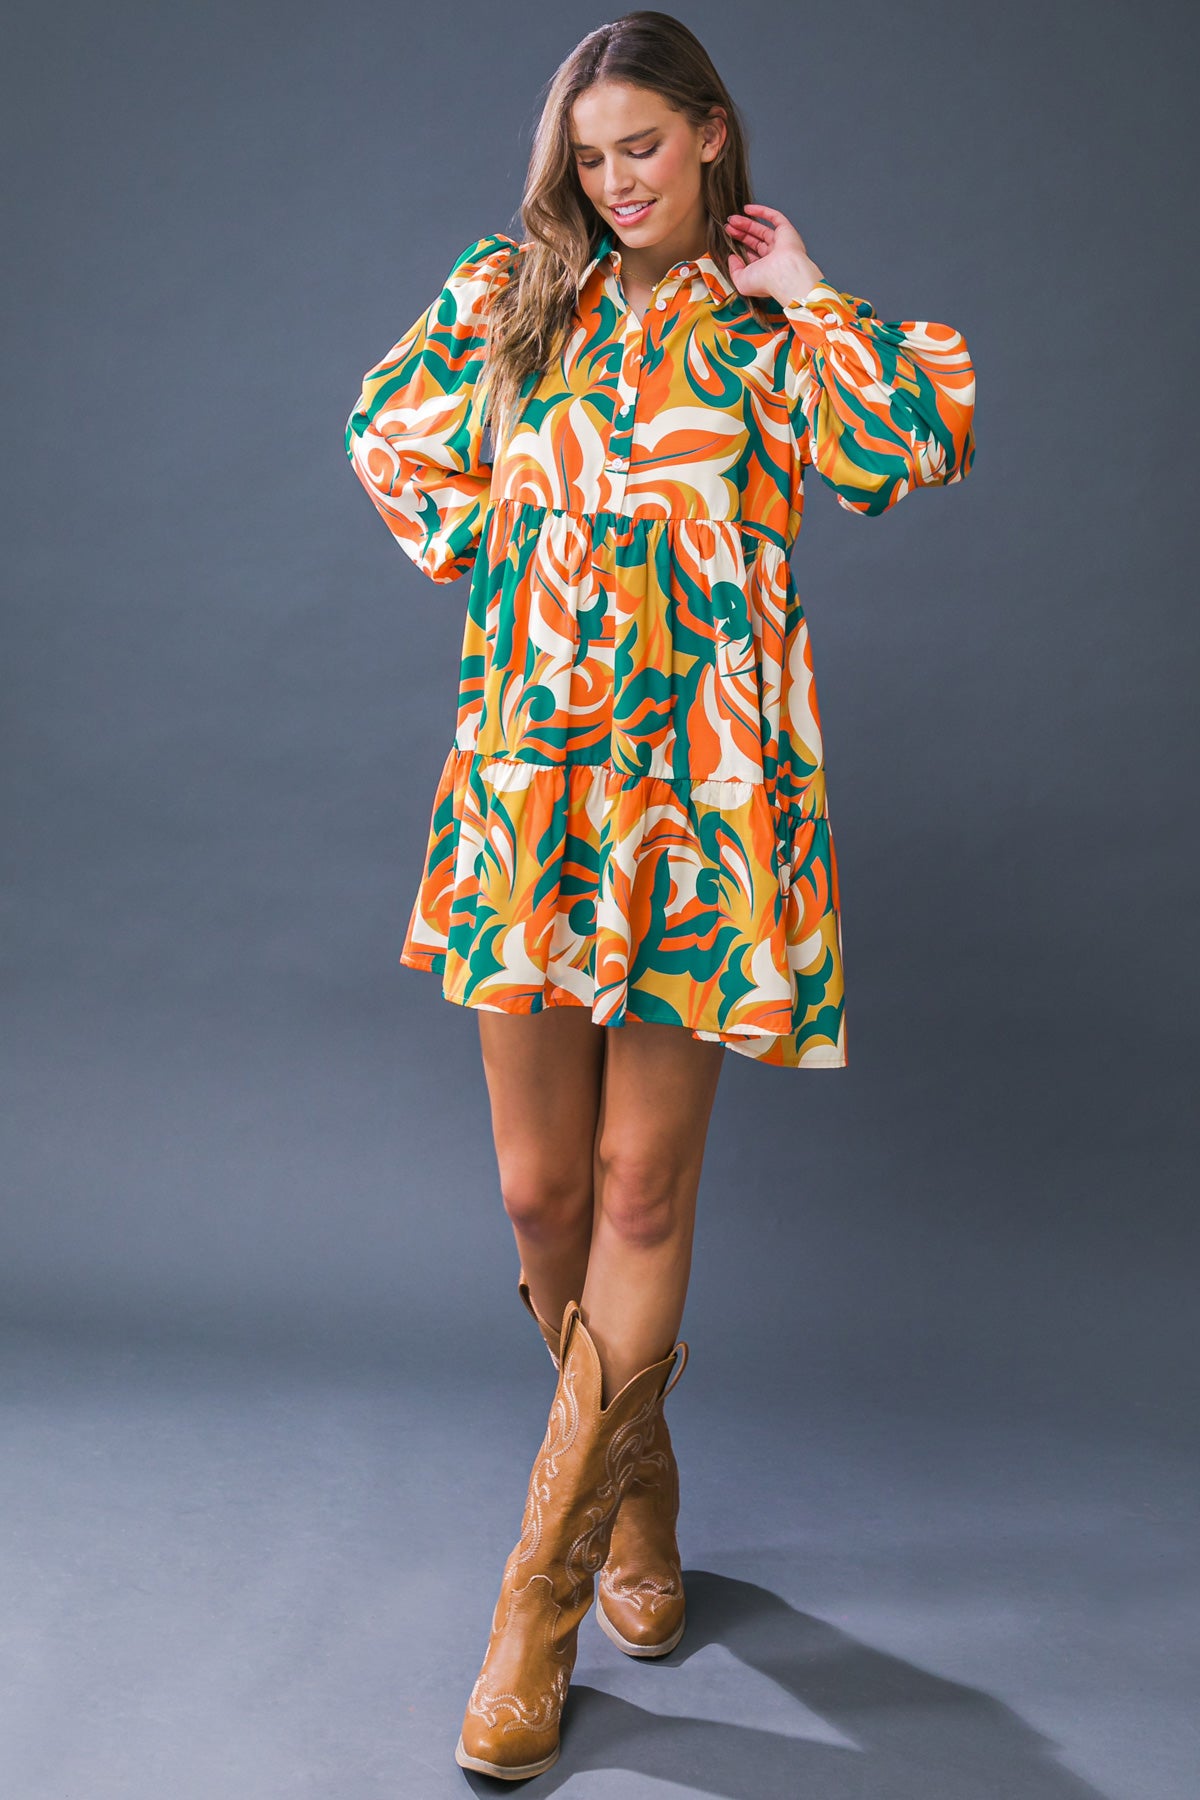 It's all Groovy Mini Dress by Flying Tomato